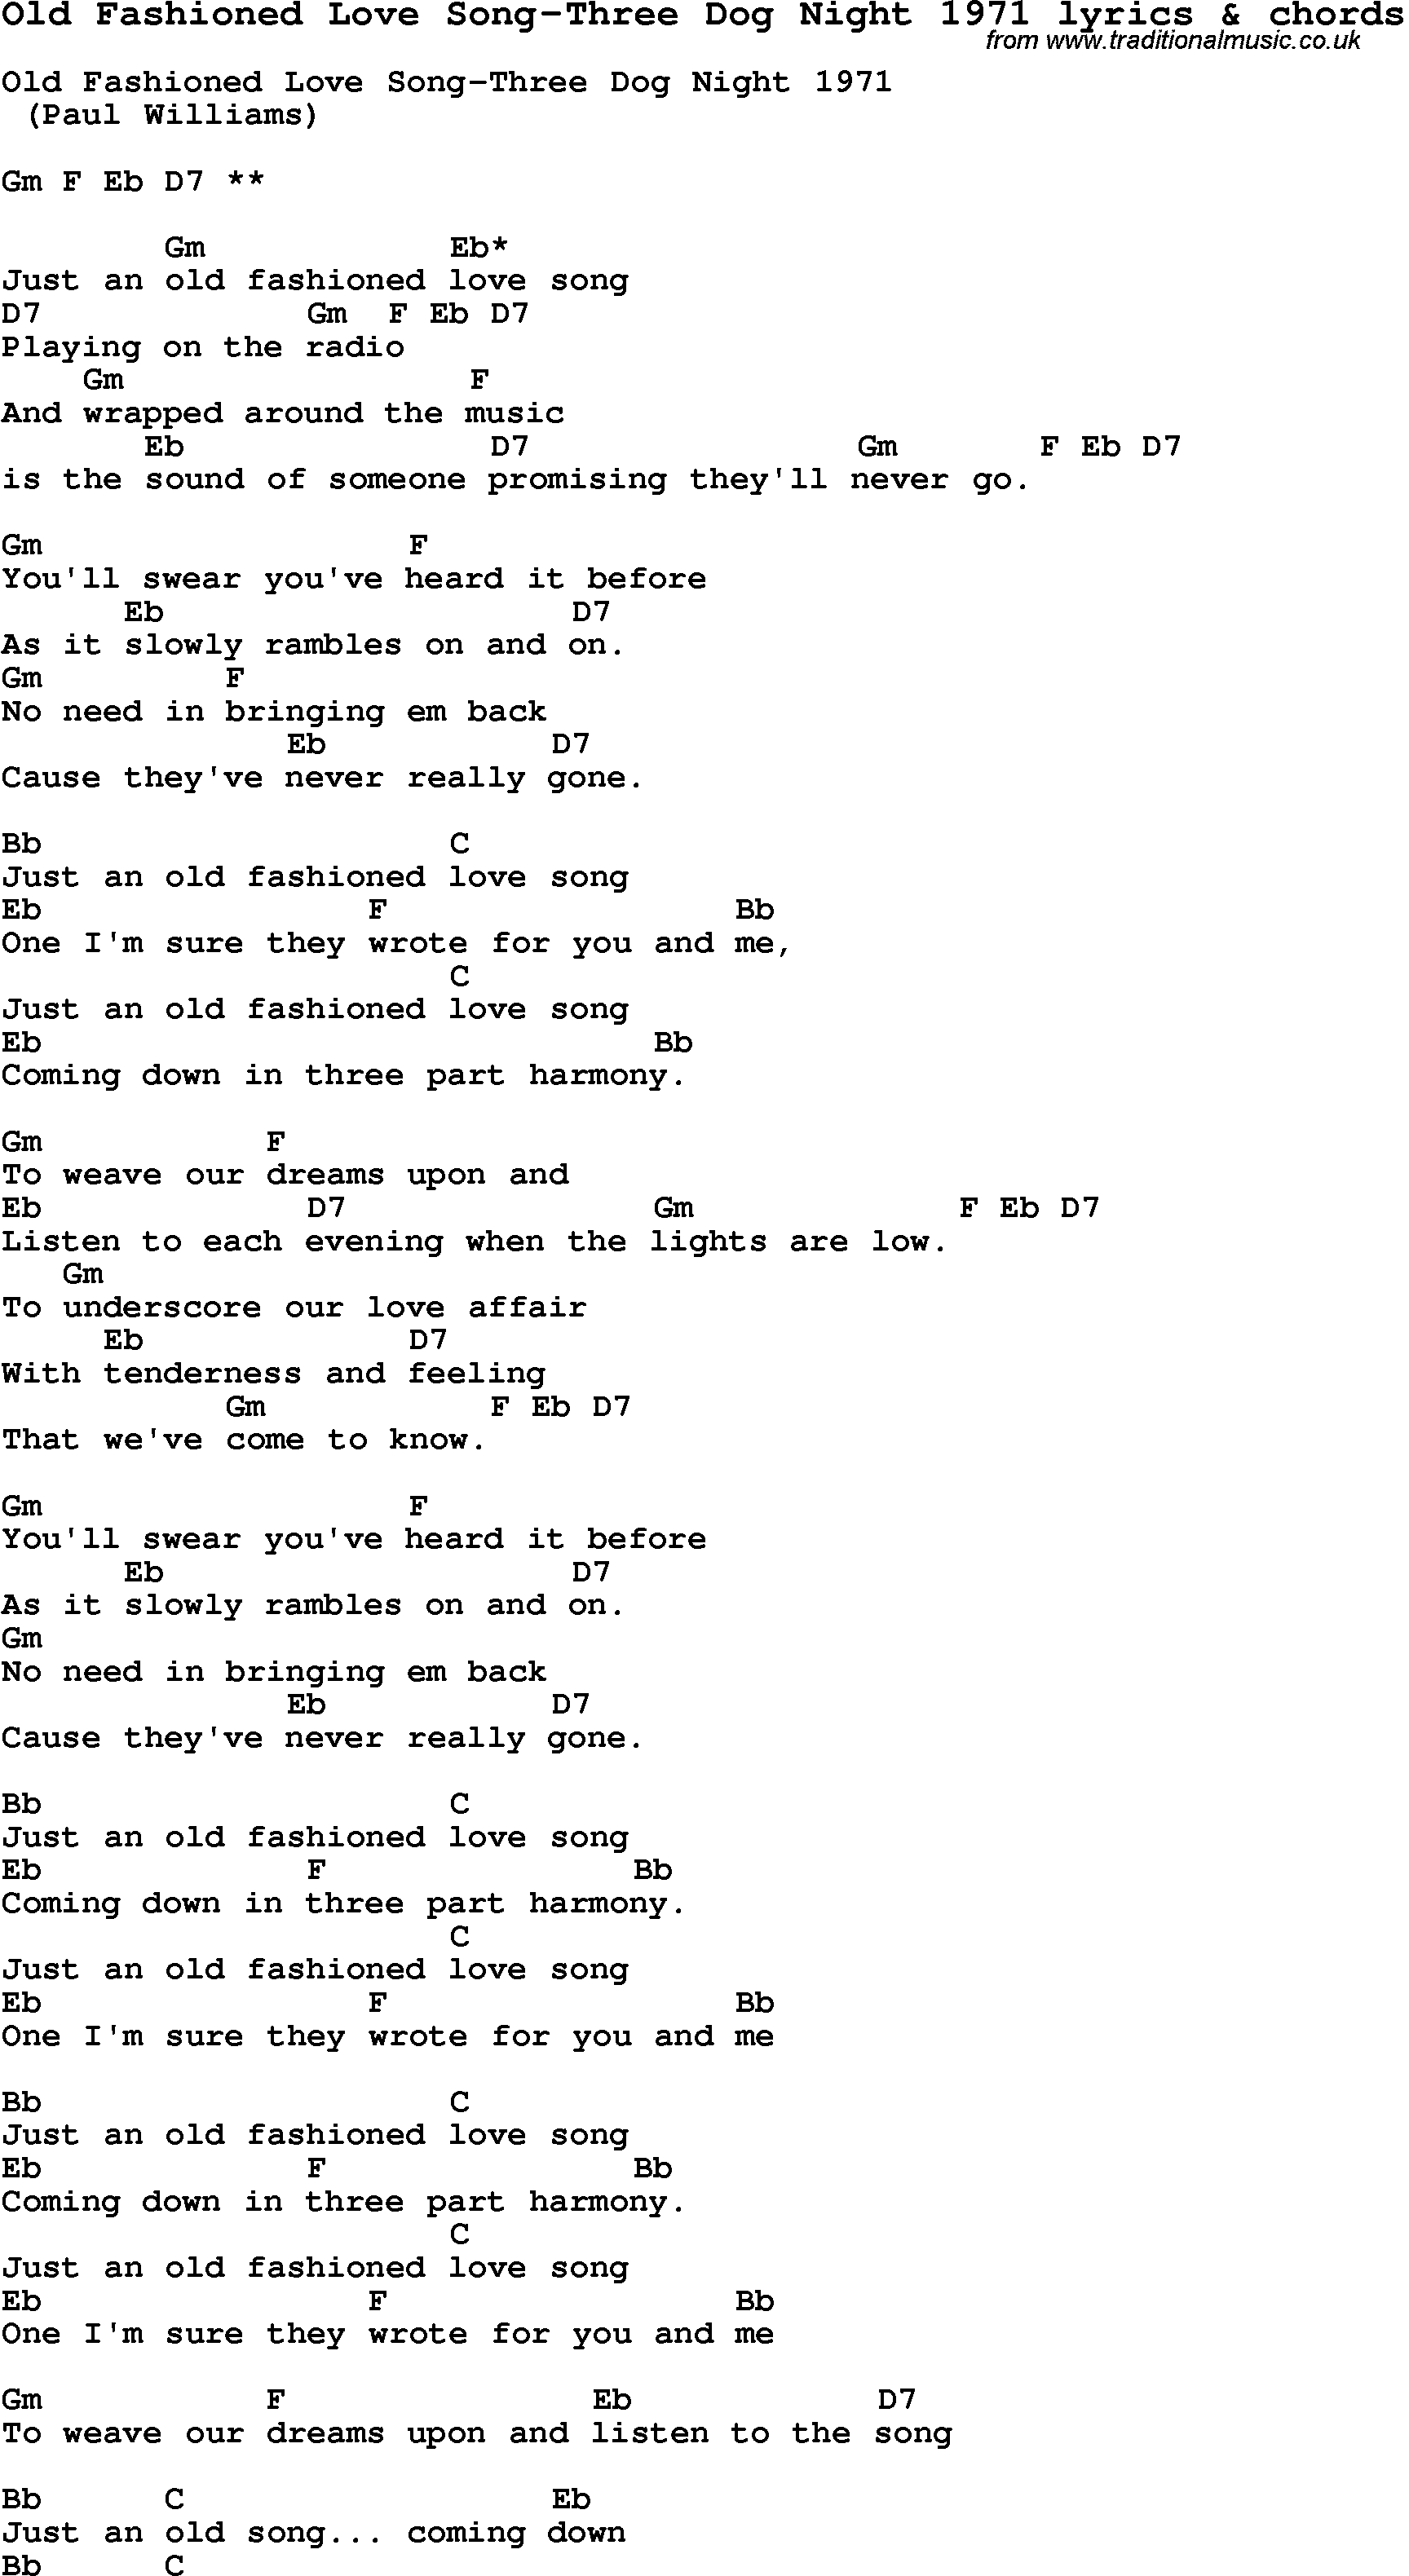 Love Song Lyrics for: Old Fashioned Love Song-Three Dog Night 1971 with chords for Ukulele, Guitar Banjo etc.